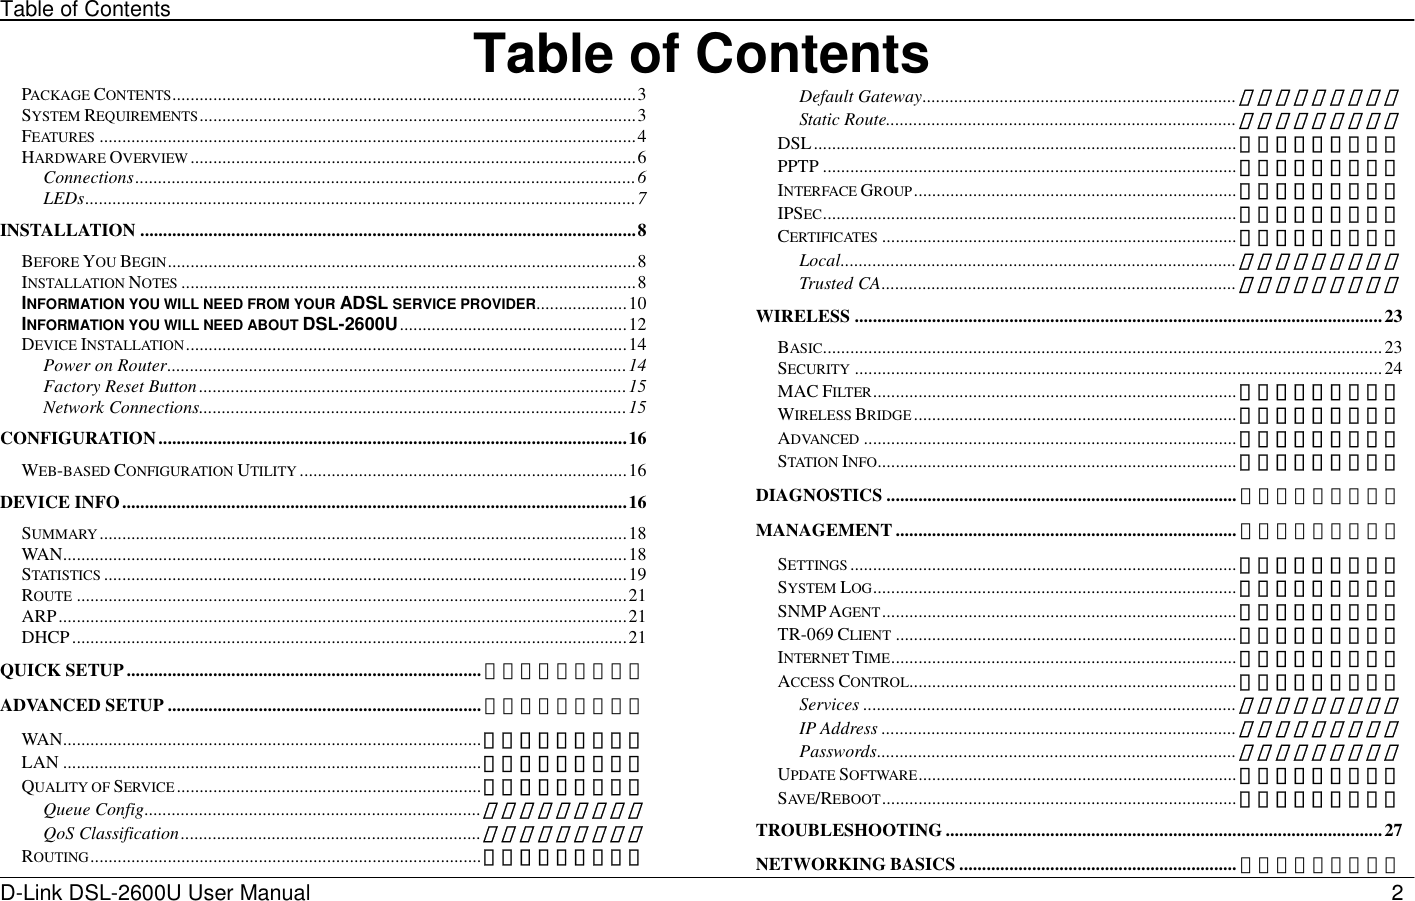 Table of Contents D-Link DSL-2600U User Manual                            2Table of ContentsPACKAGE CONTENTS......................................................................................................3 SYSTEM REQUIREMENTS................................................................................................3 FEATURES ......................................................................................................................4 HARDWARE OVERVIEW..................................................................................................6 Connections..............................................................................................................6 LEDs.........................................................................................................................7 INSTALLATION .............................................................................................................8 BEFORE YOU BEGIN.......................................................................................................8 INSTALLATION NOTES ....................................................................................................8 INFORMATION YOU WILL NEED FROM YOUR ADSL SERVICE PROVIDER....................10 INFORMATION YOU WILL NEED ABOUT DSL-2600U..................................................12 DEVICE INSTALLATION.................................................................................................14 Power on Router.....................................................................................................14 Factory Reset Button ..............................................................................................15 Network Connections..............................................................................................15 CONFIGURATION.......................................................................................................16 WEB-BASED CONFIGURATION UTILITY ........................................................................16 DEVICE INFO...............................................................................................................16 SUMMARY....................................................................................................................18 WAN............................................................................................................................18 STATISTICS ...................................................................................................................19 ROUTE .........................................................................................................................21 ARP.............................................................................................................................21 DHCP..........................................................................................................................21 QUICK SETUP .............................................................................. 错误！未定义书签。 ADVANCED SETUP ..................................................................... 错误！未定义书签。 WAN............................................................................................错误！未定义书签。 LAN ............................................................................................错误！未定义书签。 QUALITY OF SERVICE ...................................................................错误！未定义书签。 Queue Config..........................................................................错误！未定义书签。 QoS Classification..................................................................错误！未定义书签。 ROUTING......................................................................................错误！未定义书签。 Default Gateway.....................................................................错误！未定义书签。 Static Route.............................................................................错误！未定义书签。 DSL............................................................................................. 错误！未定义书签。 PPTP ........................................................................................... 错误！未定义书签。 INTERFACE GROUP....................................................................... 错误！未定义书签。 IPSEC........................................................................................... 错误！未定义书签。 CERTIFICATES .............................................................................. 错误！未定义书签。 Local.......................................................................................错误！未定义书签。 Trusted CA..............................................................................错误！未定义书签。 WIRELESS ....................................................................................................................23 BASIC........................................................................................................................... 23 SECURITY ....................................................................................................................24 MAC FILTER................................................................................ 错误！未定义书签。 WIRELESS BRIDGE ....................................................................... 错误！未定义书签。 ADVANCED .................................................................................. 错误！未定义书签。 STATION INFO............................................................................... 错误！未定义书签。 DIAGNOSTICS ............................................................................. 错误！未定义书签。 MANAGEMENT ........................................................................... 错误！未定义书签。 SETTINGS ..................................................................................... 错误！未定义书签。 SYSTEM LOG................................................................................ 错误！未定义书签。 SNMP AGENT.............................................................................. 错误！未定义书签。 TR-069 CLIENT ........................................................................... 错误！未定义书签。 INTERNET TIME............................................................................ 错误！未定义书签。 ACCESS CONTROL........................................................................ 错误！未定义书签。 Services ..................................................................................错误！未定义书签。 IP Address ..............................................................................错误！未定义书签。 Passwords...............................................................................错误！未定义书签。 UPDATE SOFTWARE...................................................................... 错误！未定义书签。 SAV E /REBOOT.............................................................................. 错误！未定义书签。 TROUBLESHOOTING ................................................................................................27 NETWORKING BASICS ............................................................. 错误！未定义书签。 